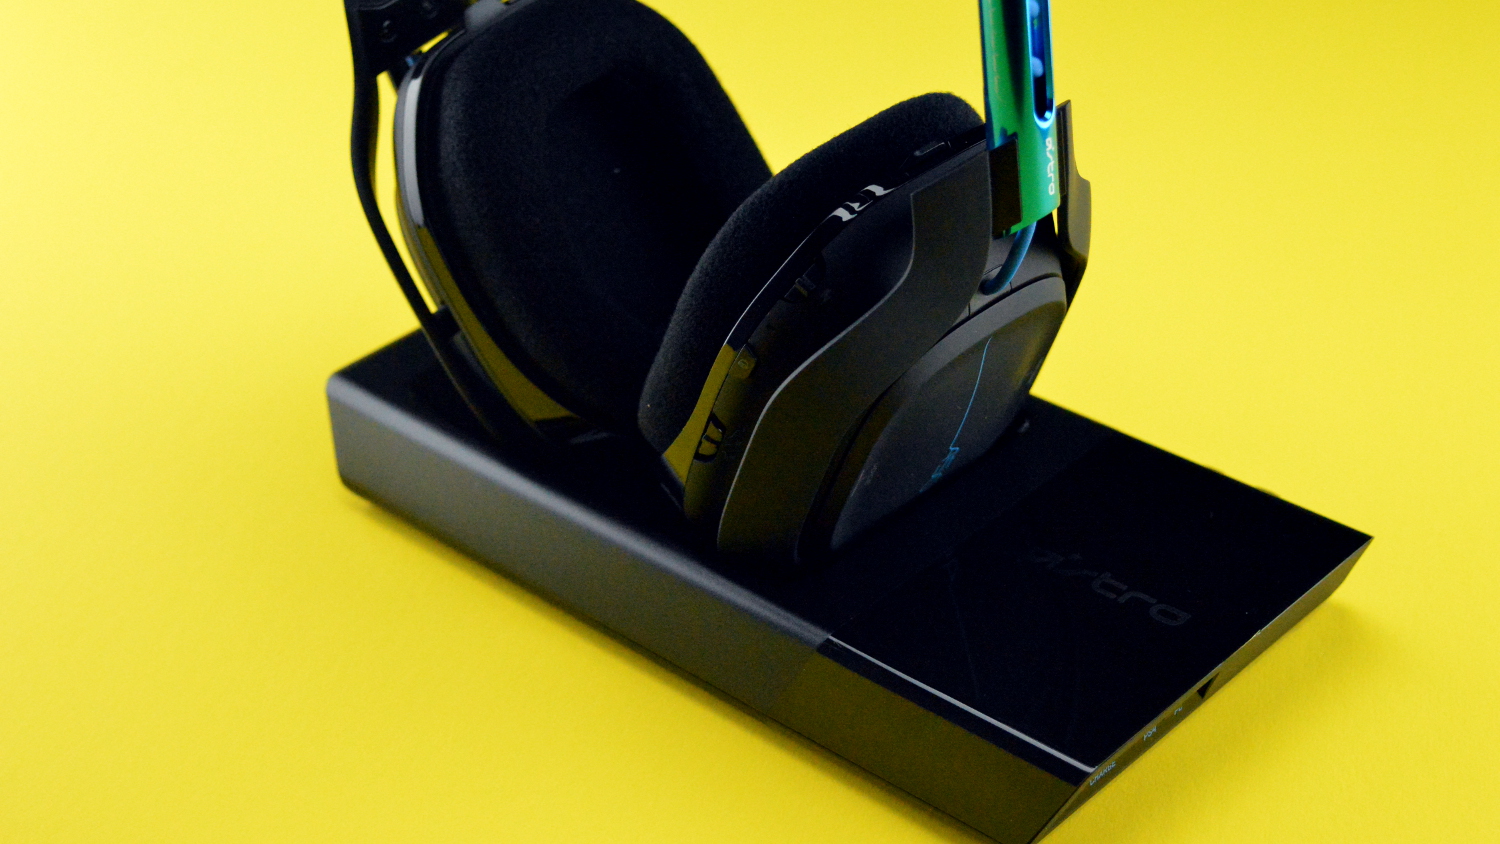 Astro A50 Wireless Review: The Rolls Royce of Headsets - Tech Advisor